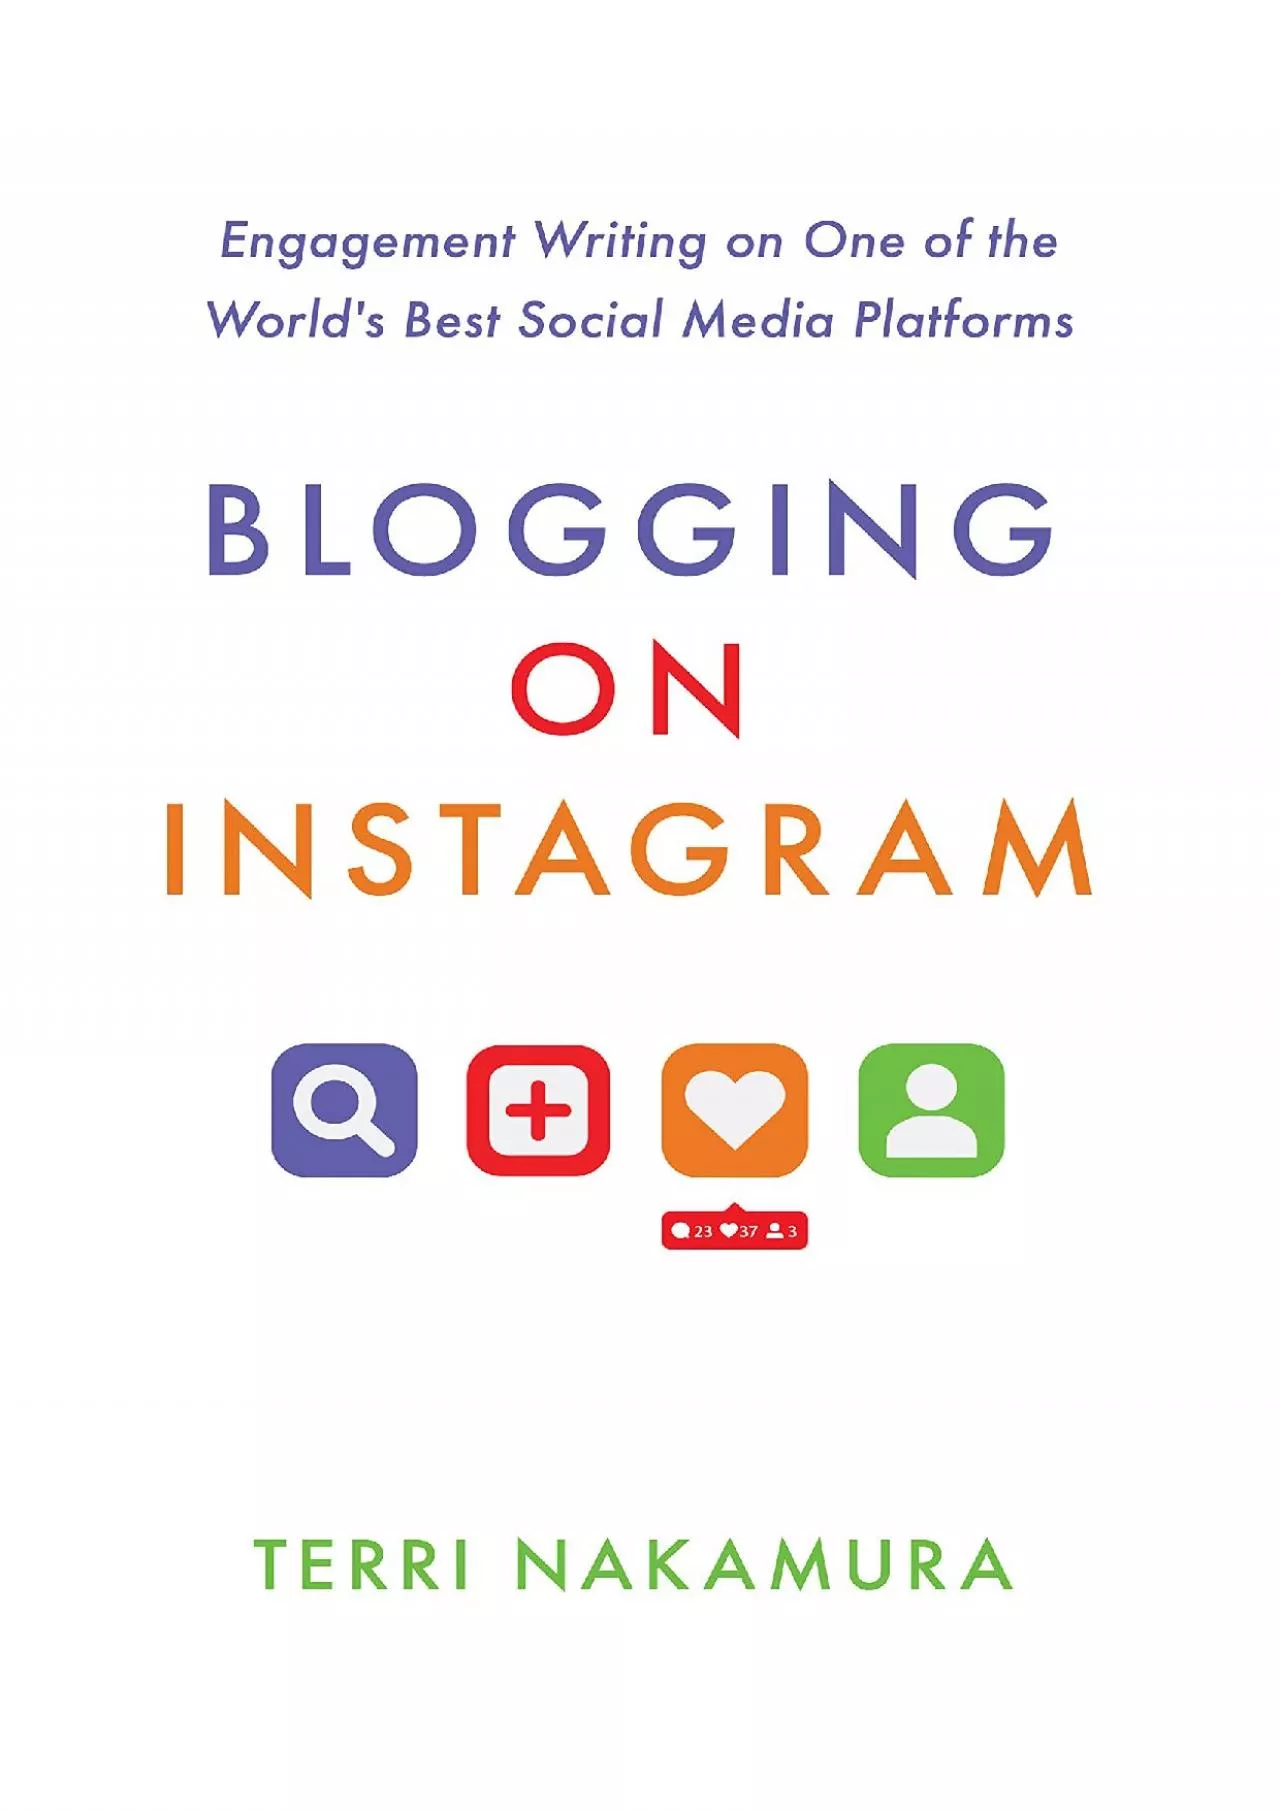 (BOOS)-Blogging on Instagram: Engagement Writing on One of the World’s Best Social Media